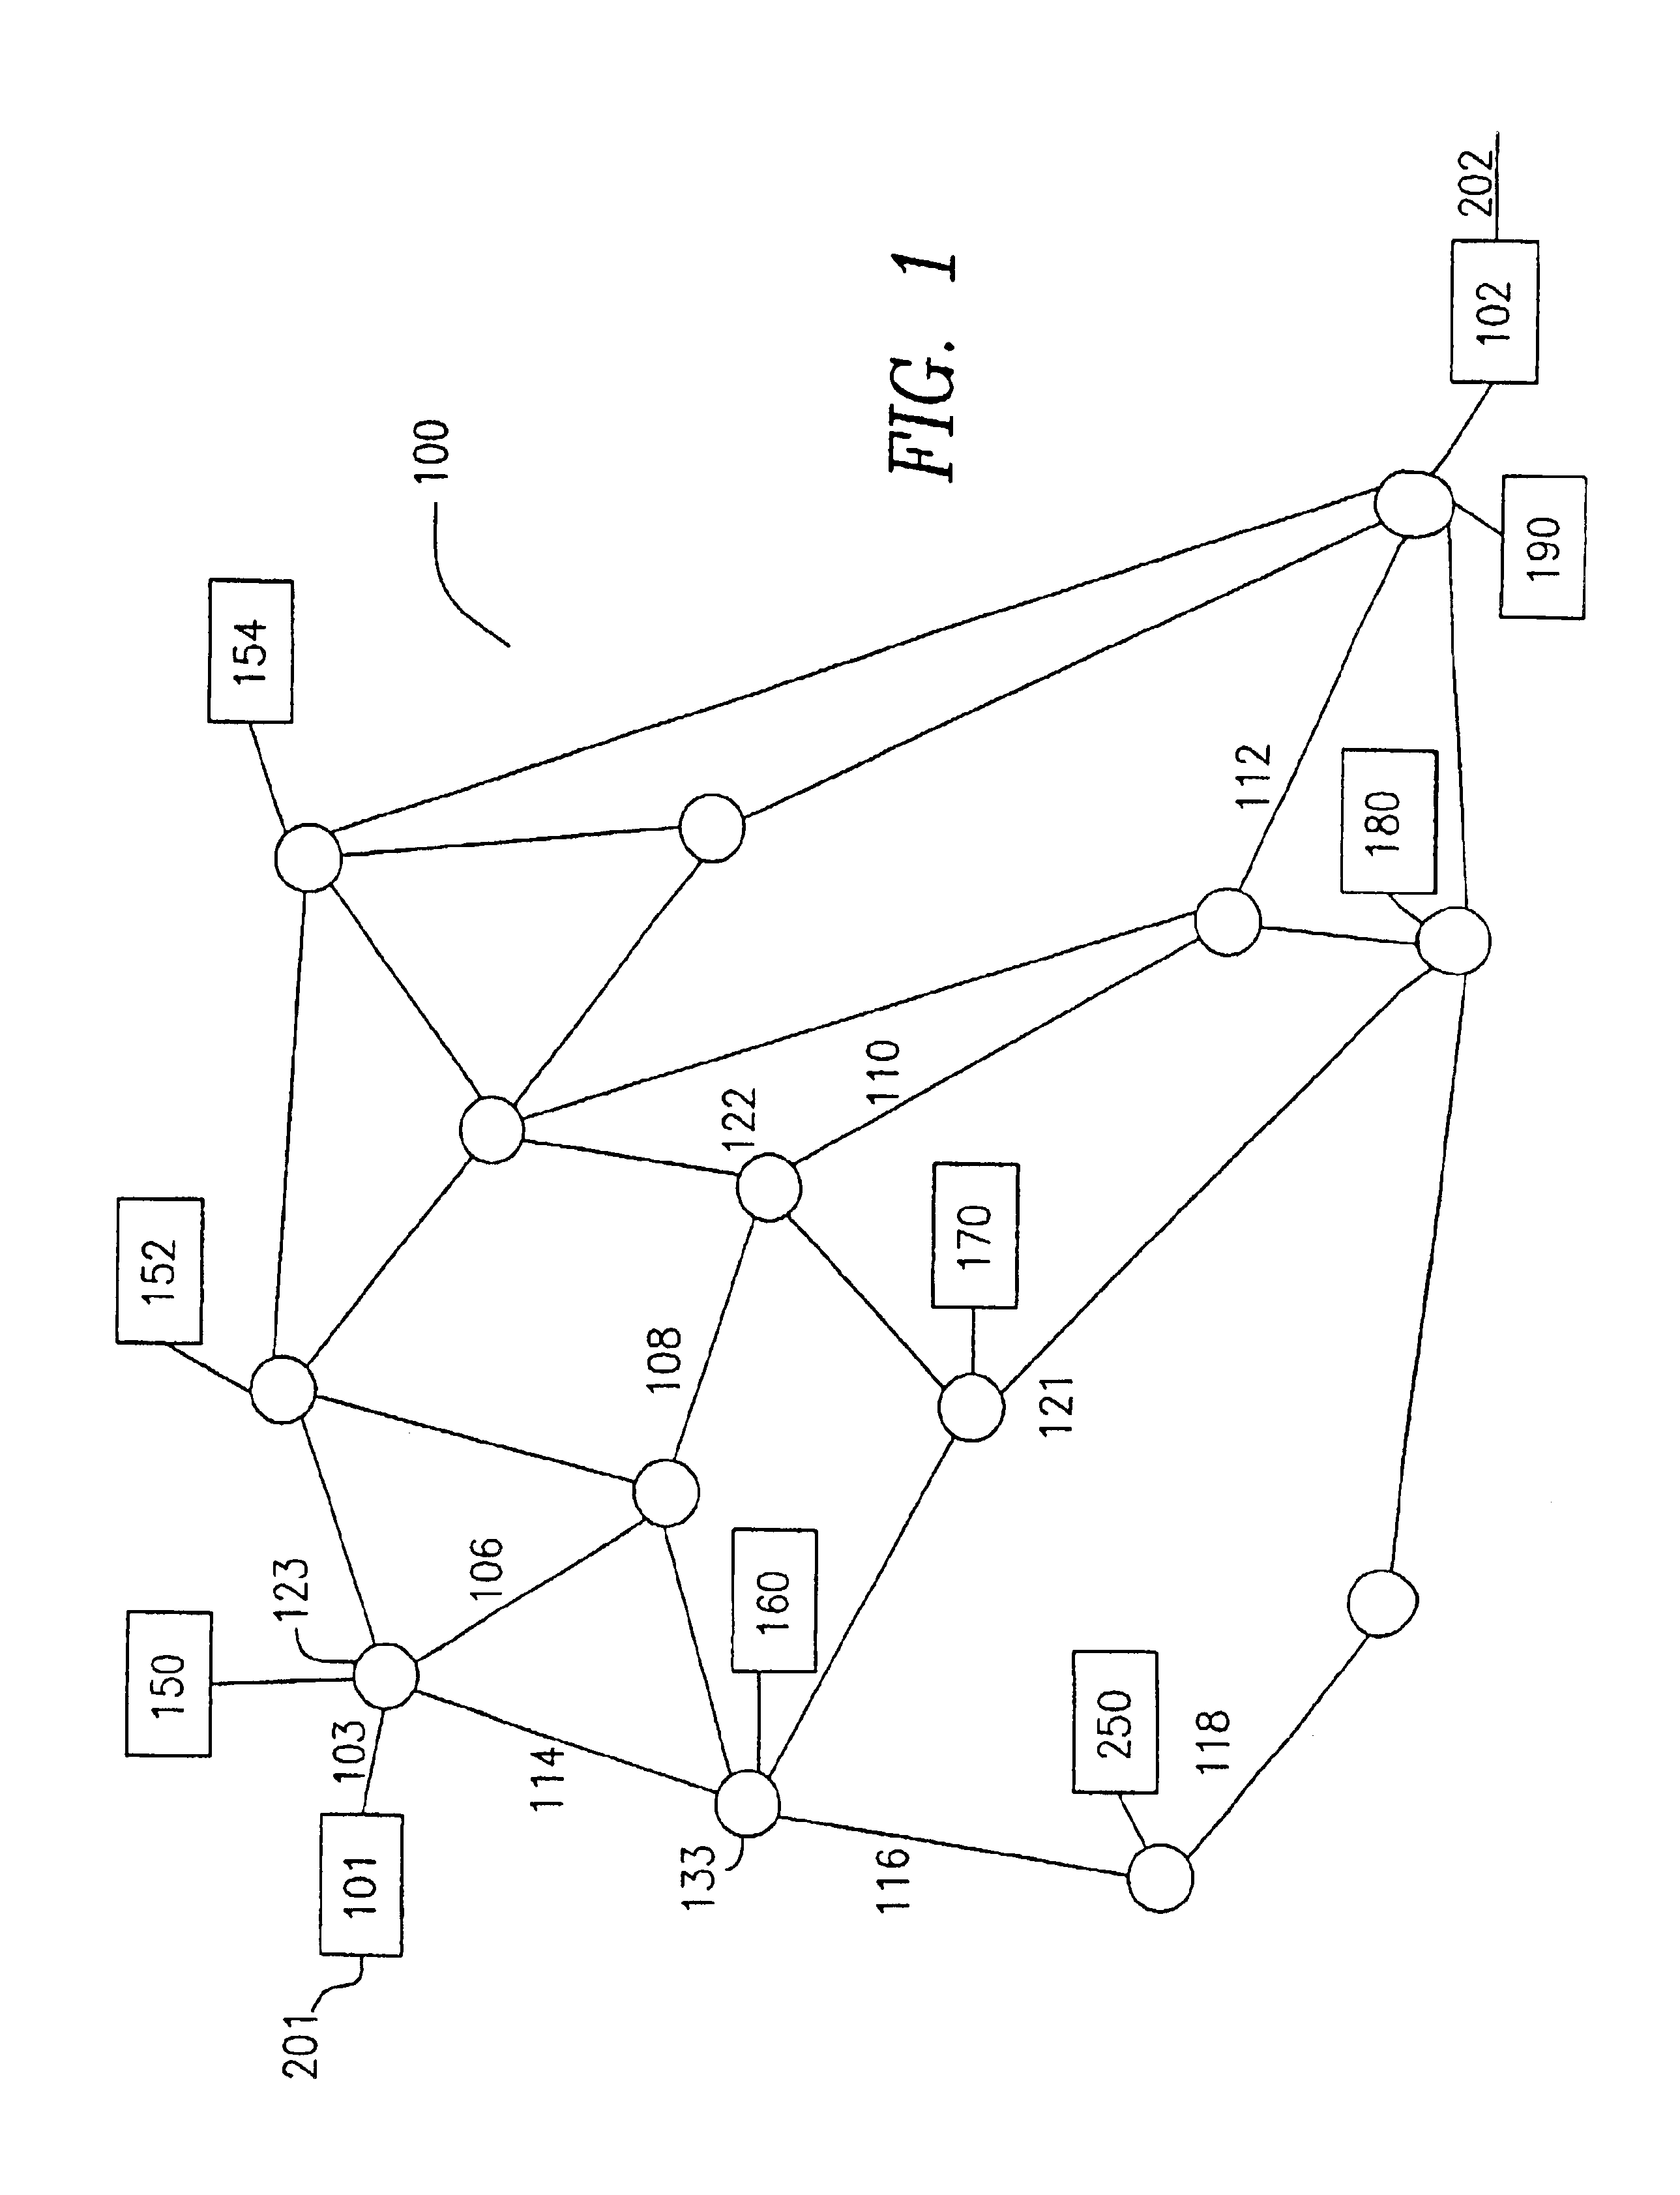 Method and apparatus for optimizing transmission of signals over a packet switched data network